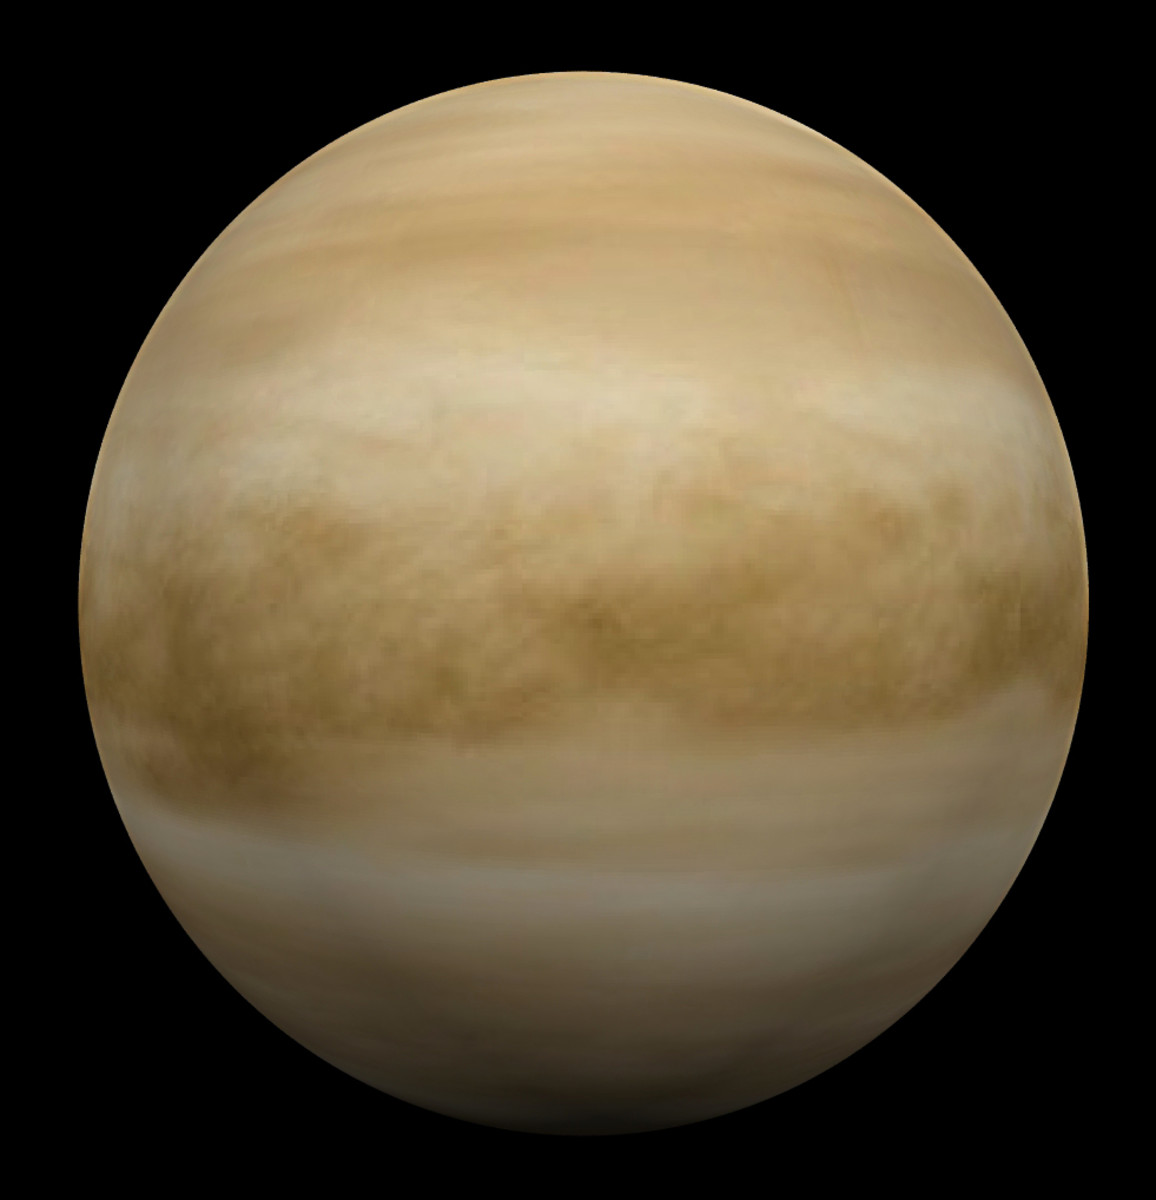 Astronomy; The Venus Facts and Photos HubPages